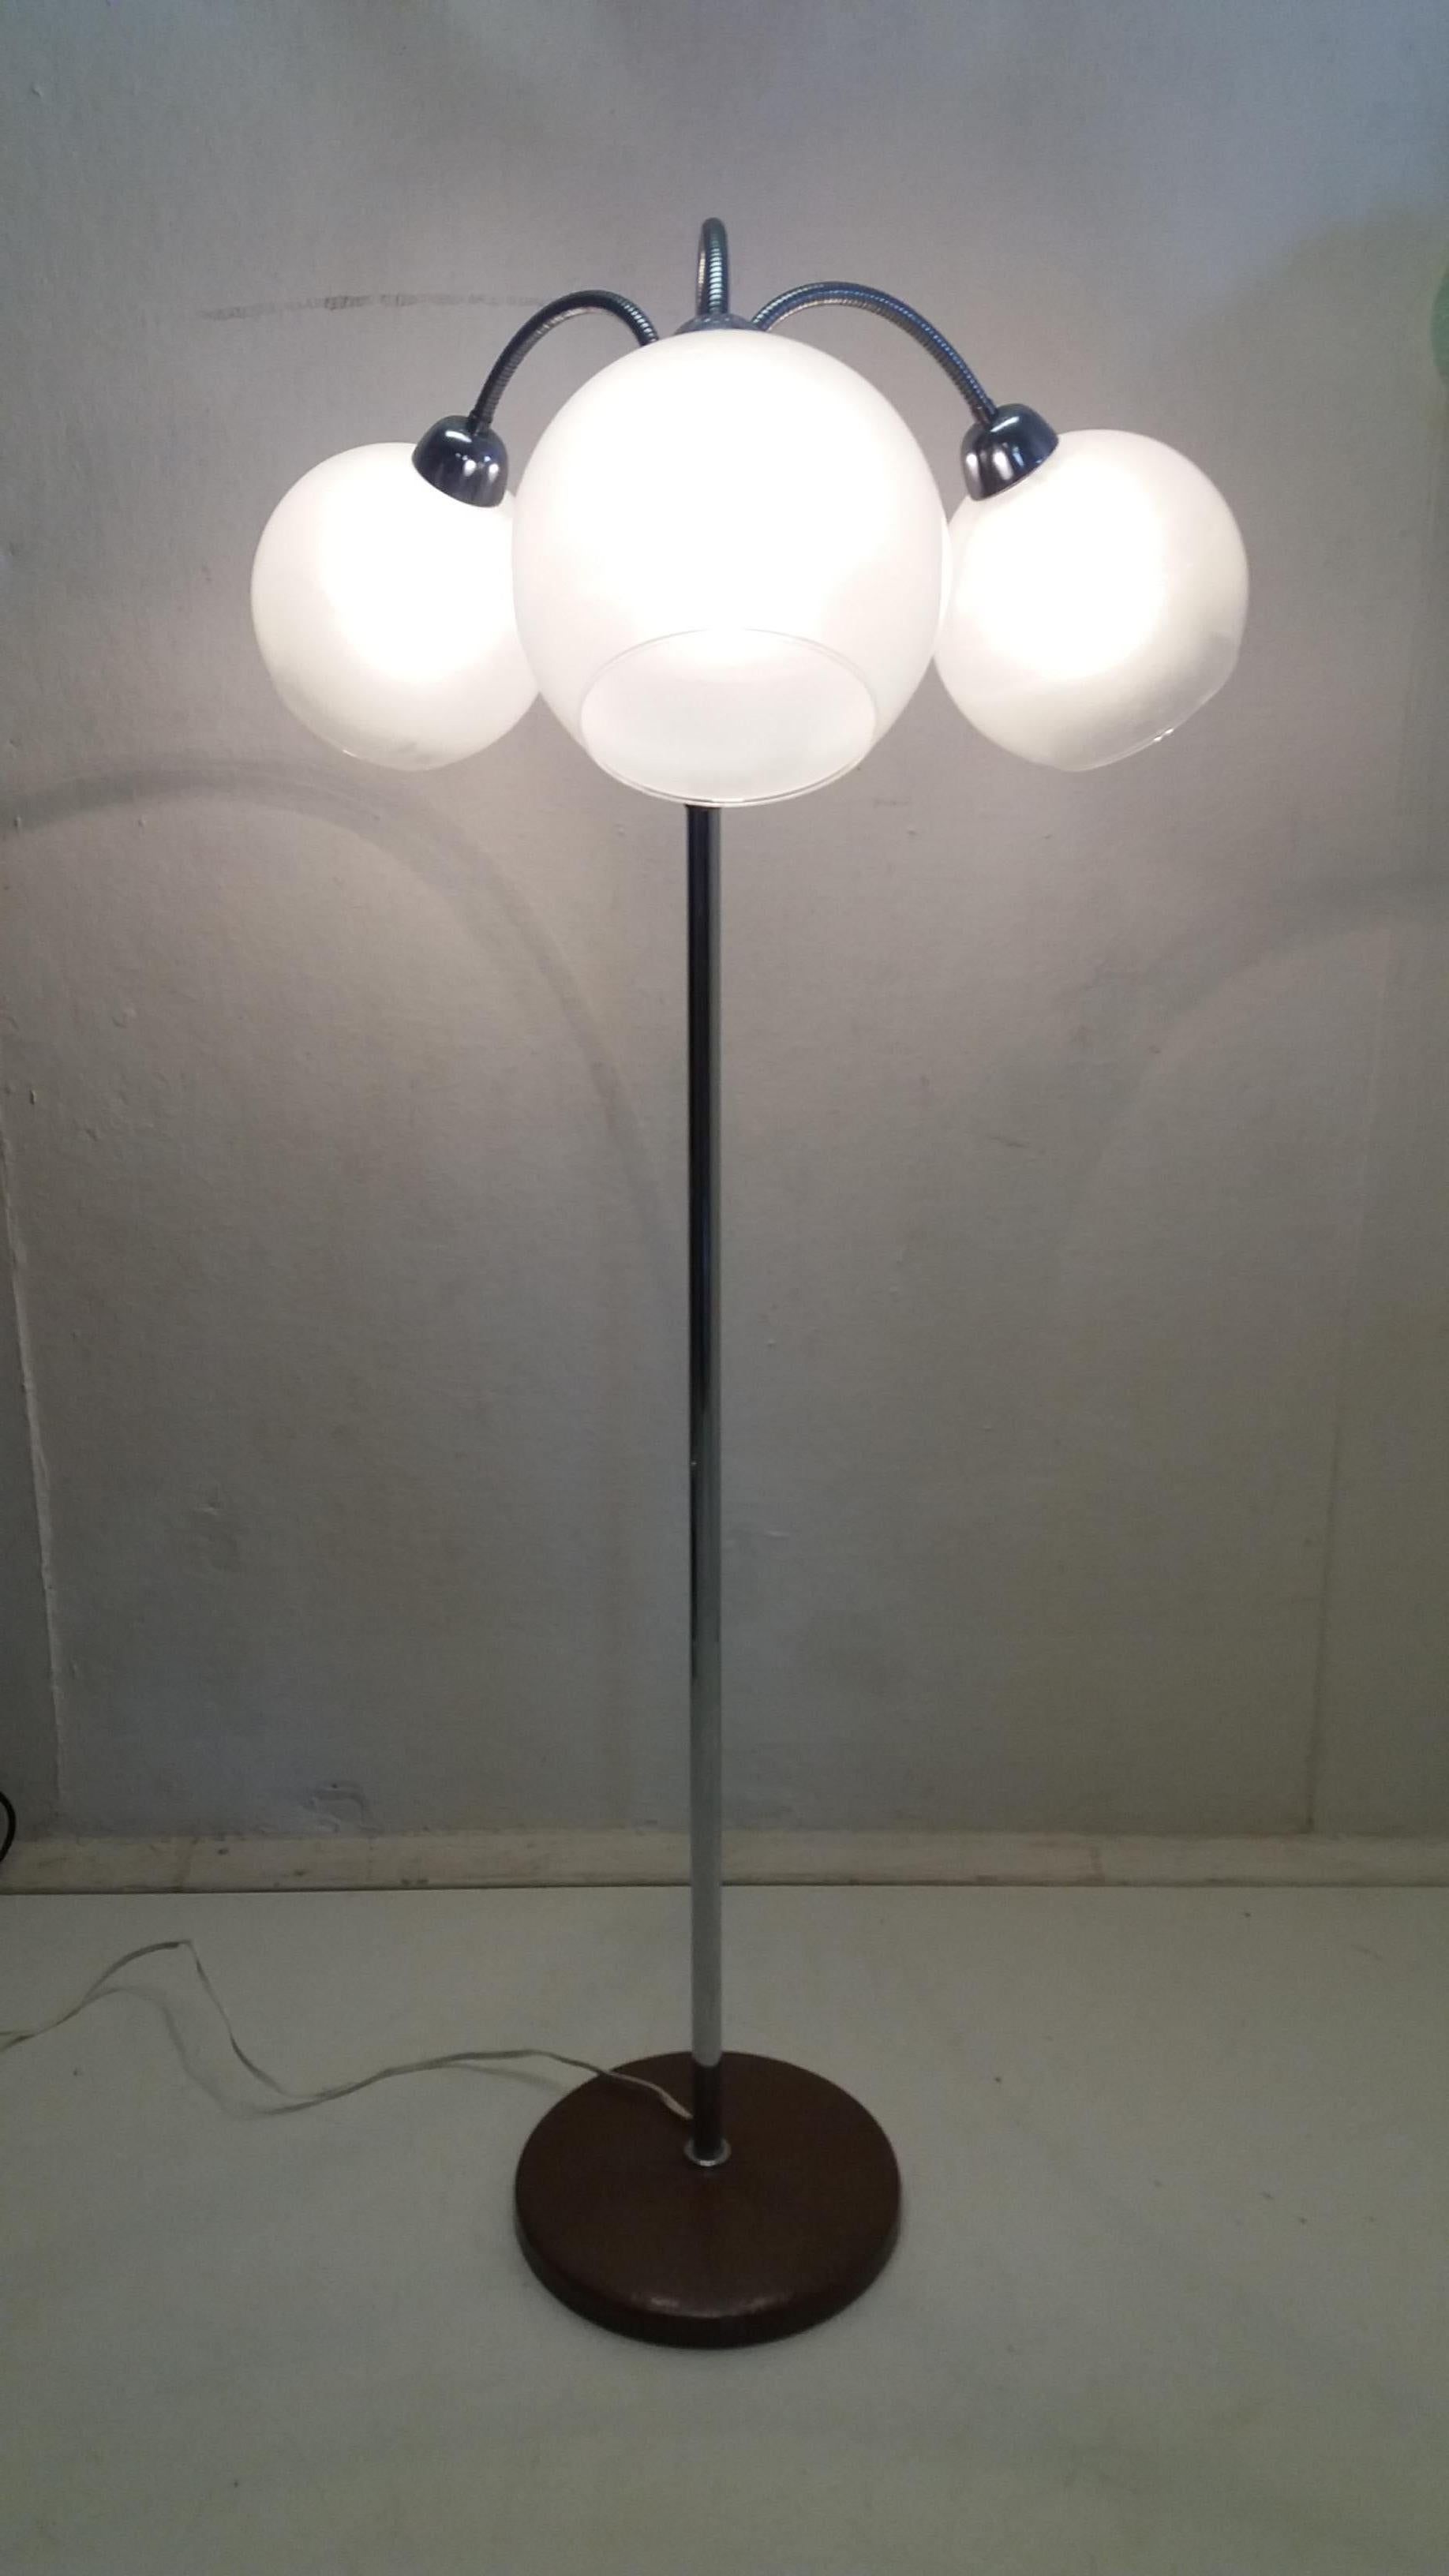 - Made in Czechoslovakia
- Made of metal, glass
- Re-polished
- Fully functional
- Measures: Base diameter 30cm
- Lampshades diameter 21cm
- Good, original condition.